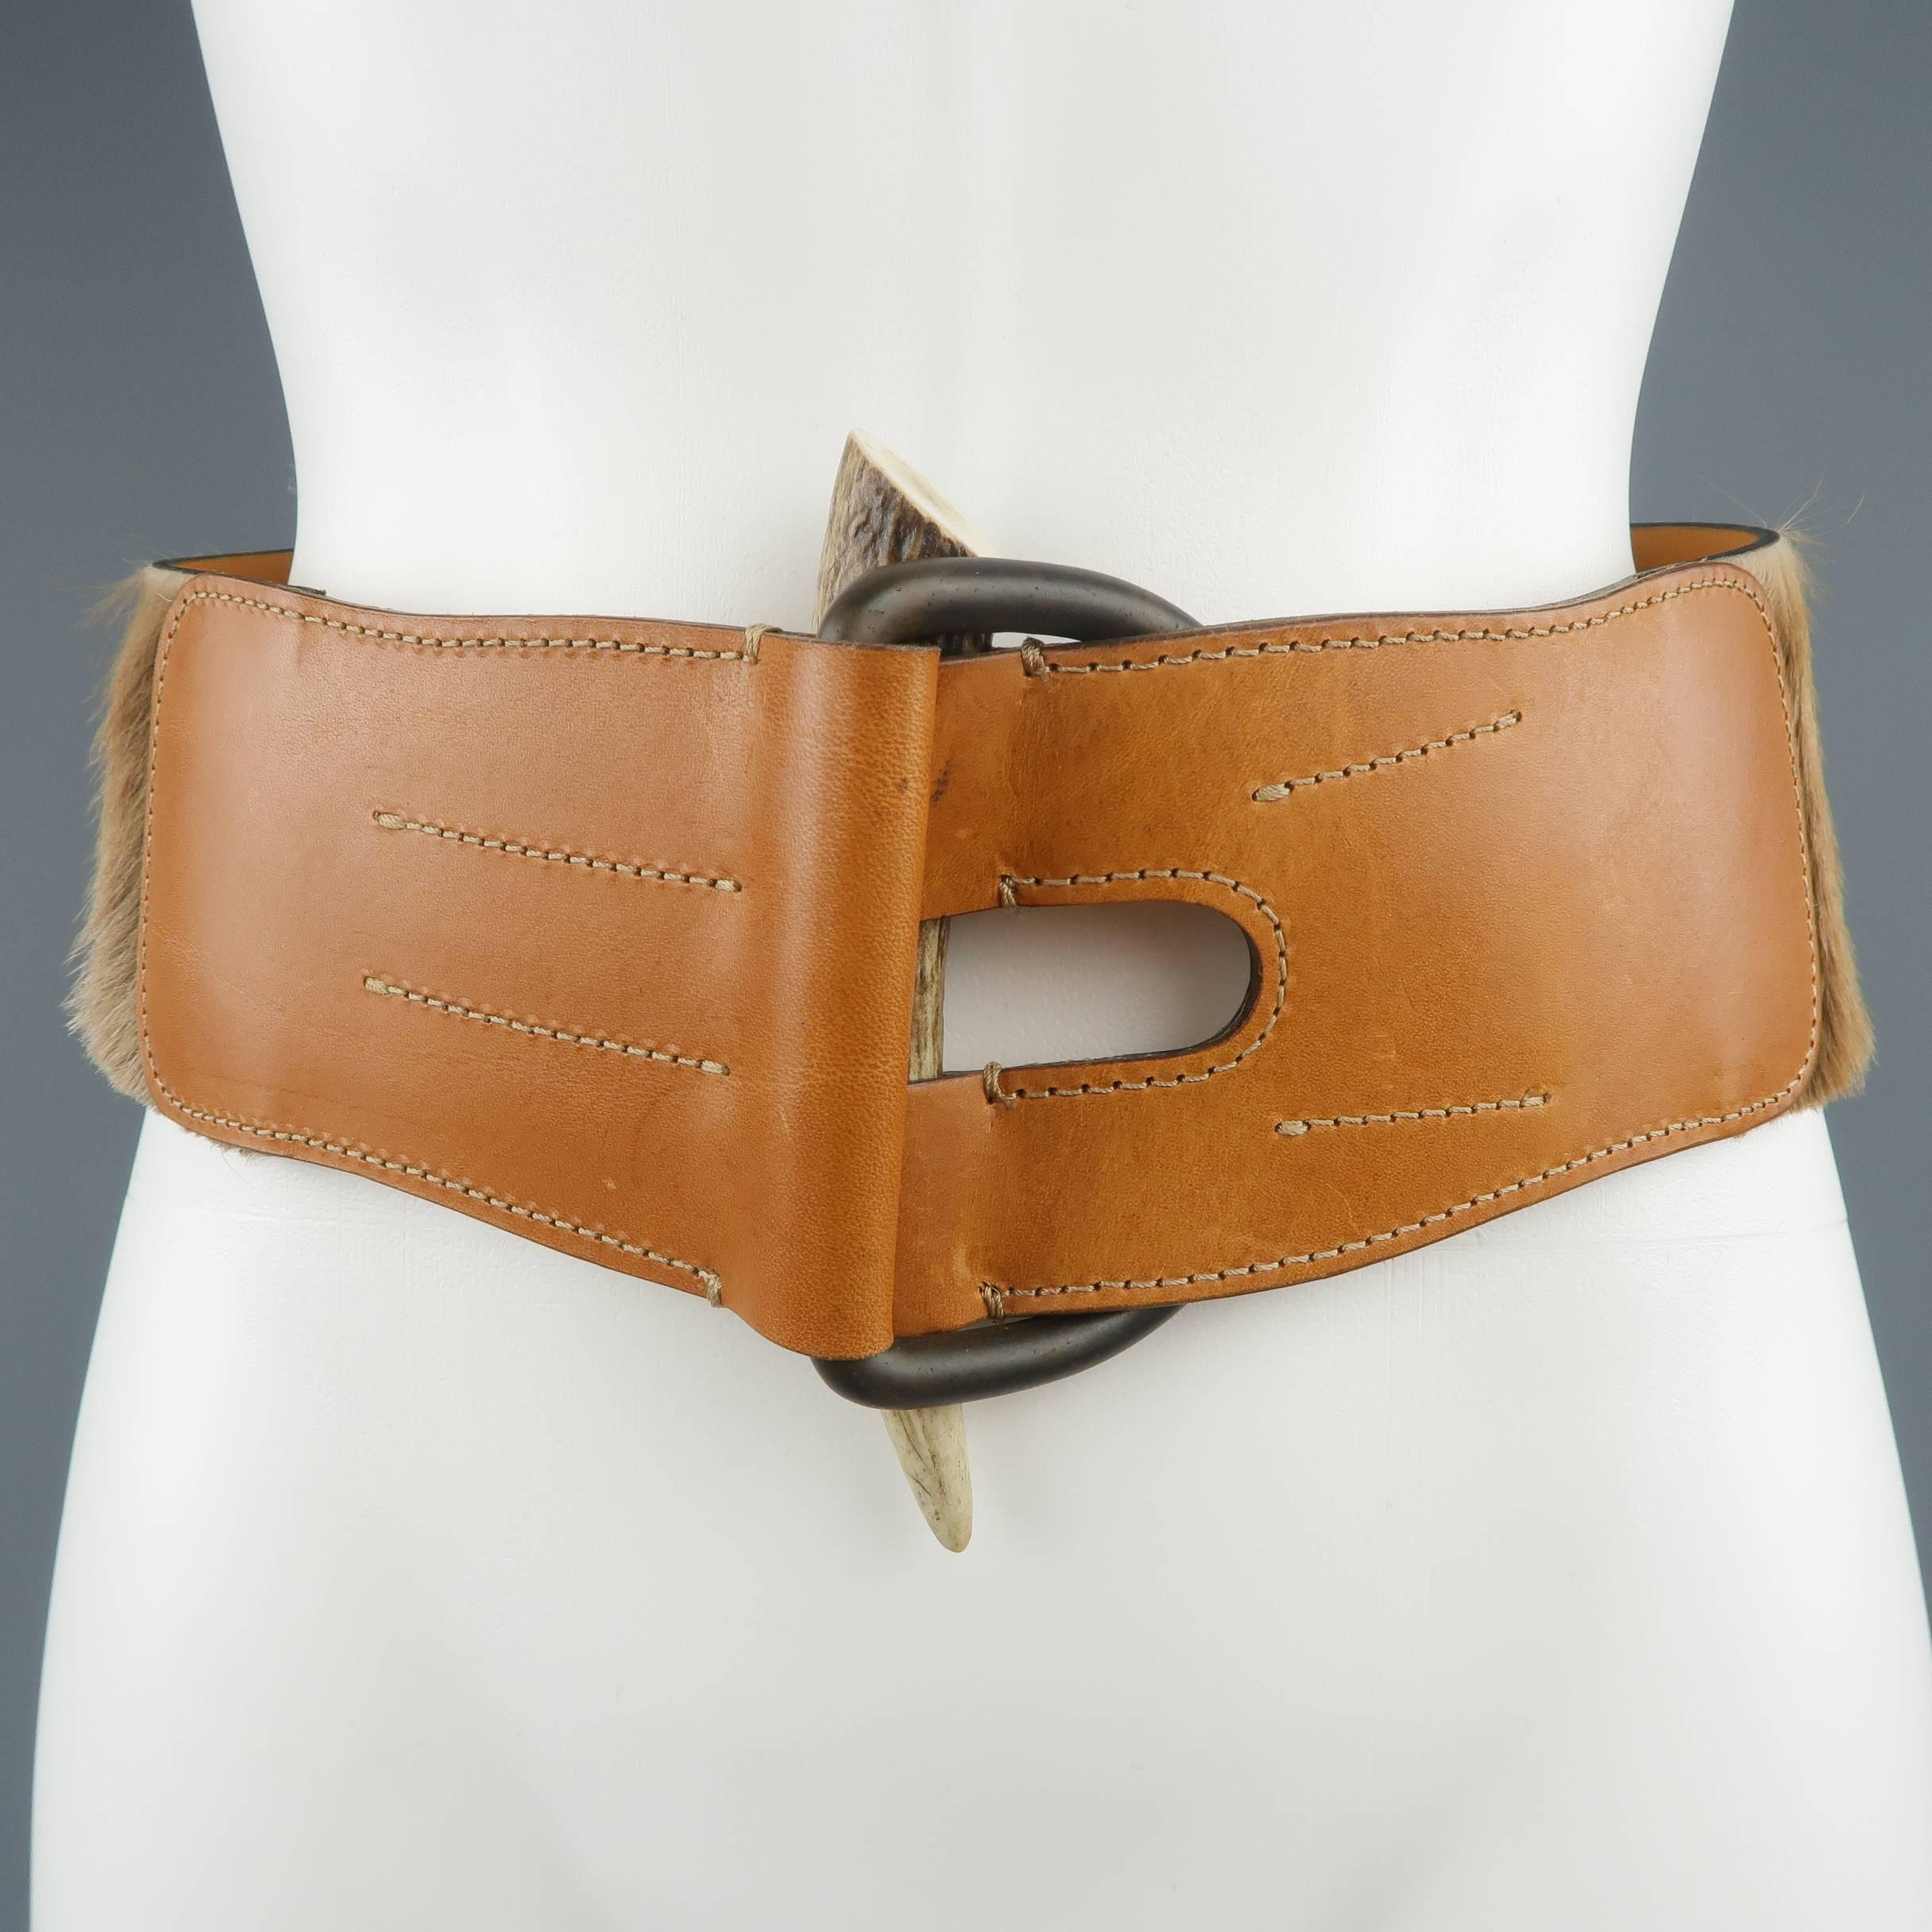 RALPH LAUREN belt features a thick beige horsehair leather strap with D loop and horn front and adjustable button stud closure back. Made in Italy.
 
Excellent Pre-Owned Condition.
Marked: M
 
Measurements:
 
Length: 38.5 in.
Width: 3 in.
Fits: